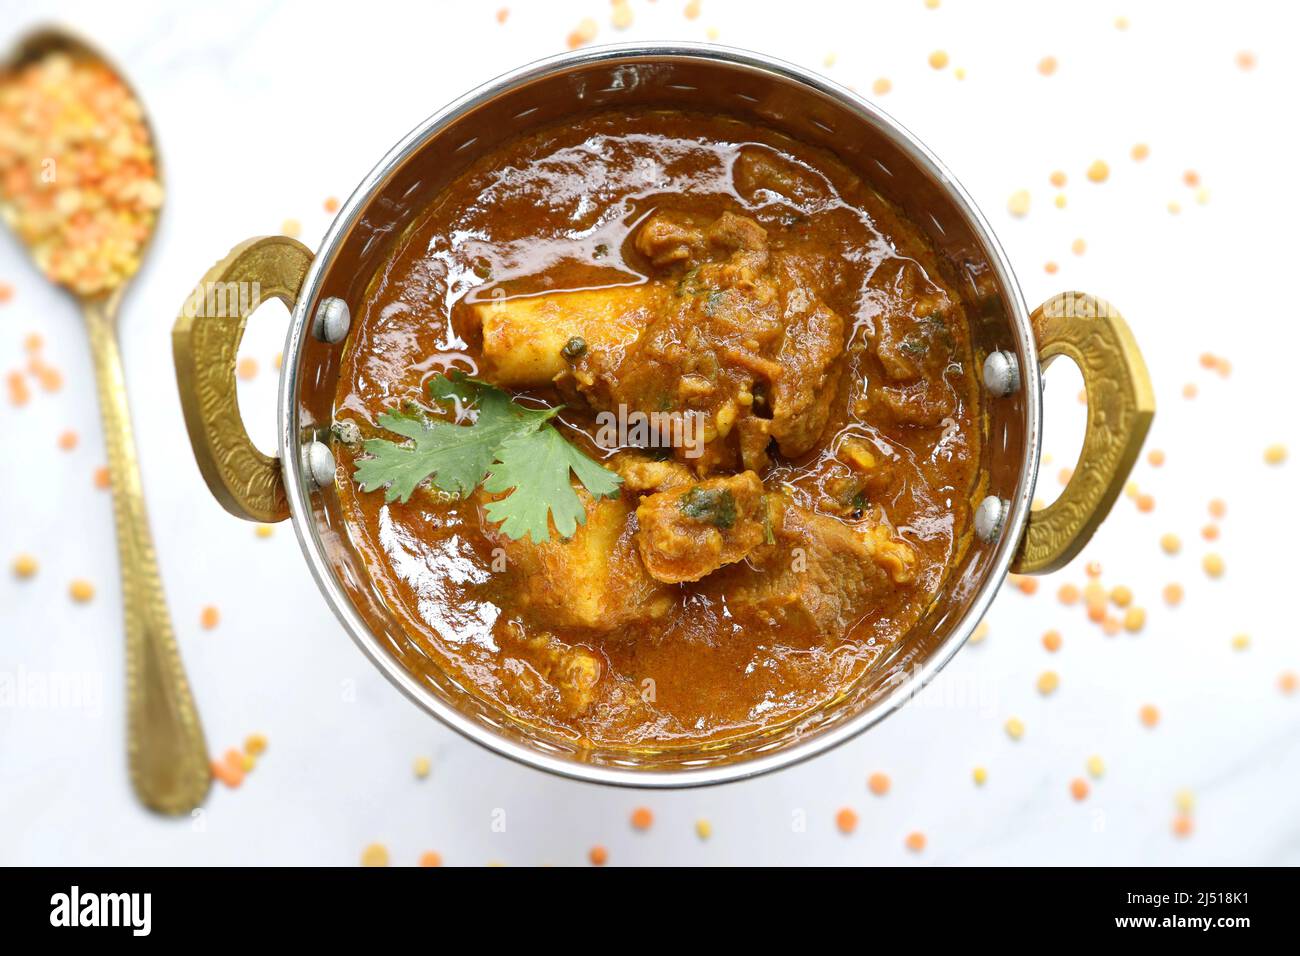 Dal Gosht or Daal Gosht is one of the very popular Mutton Recipes in India. Mutton cooked with spices and mixed lentils. Mutton dalcha. Stock Photo